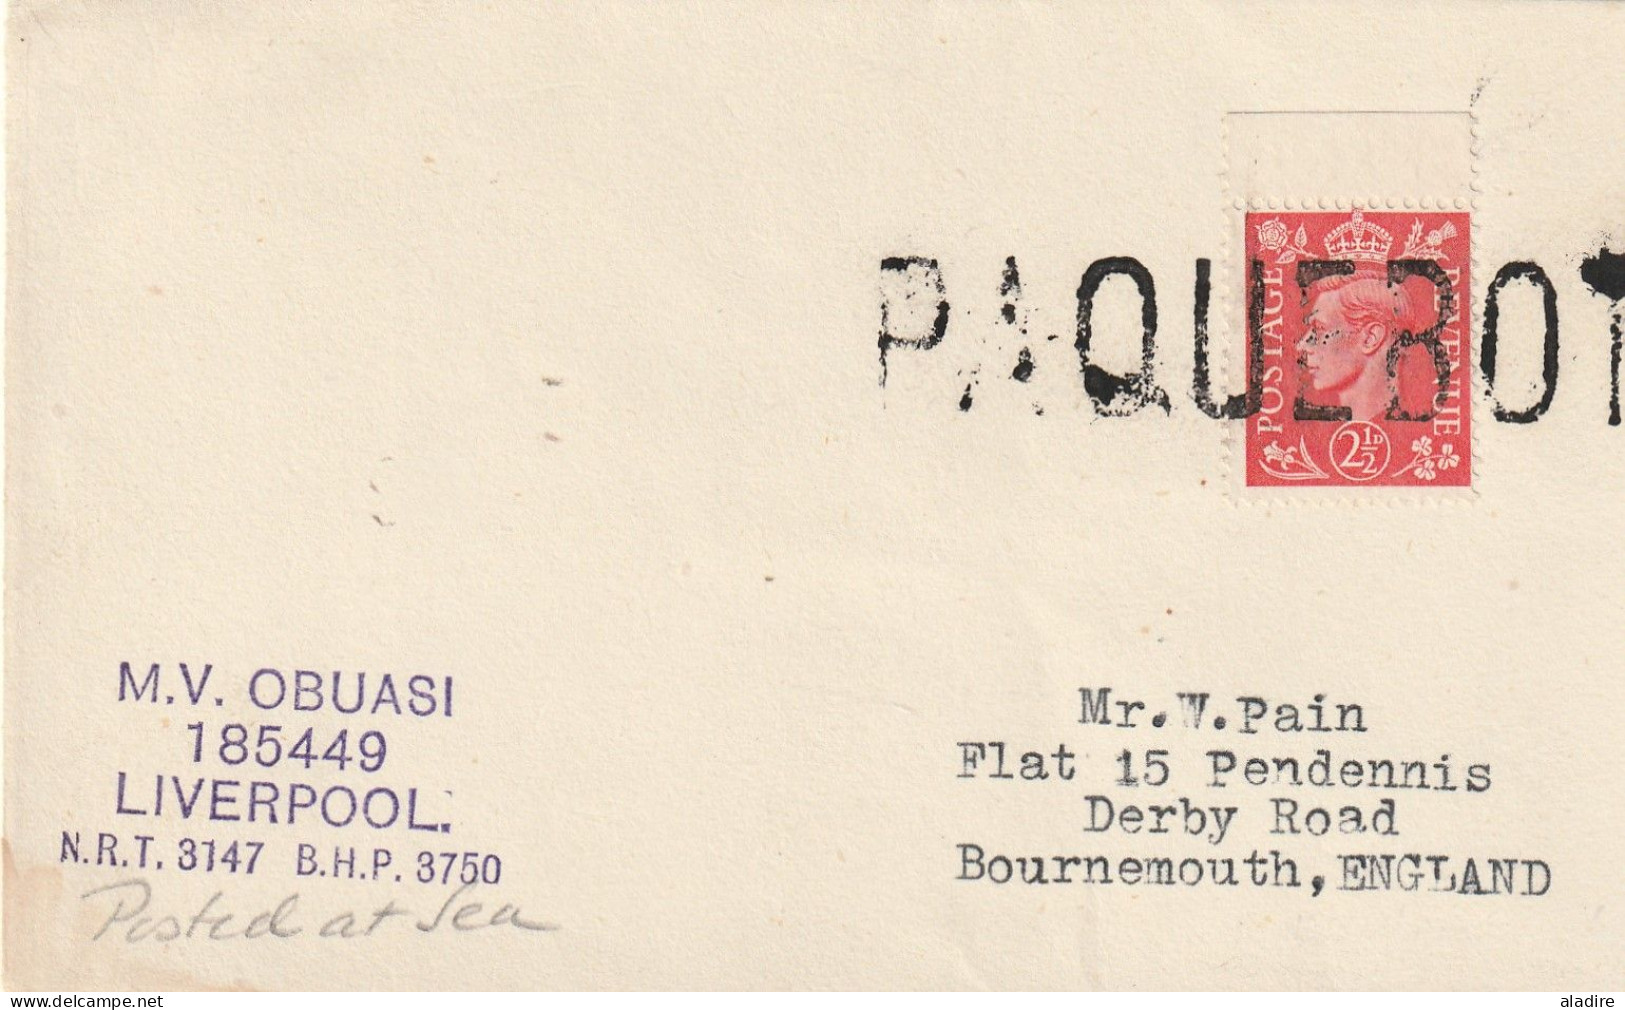 1904 /1964 - a collection of 14 PAQUEBOT postcards and covers - 28 scans (back and front)